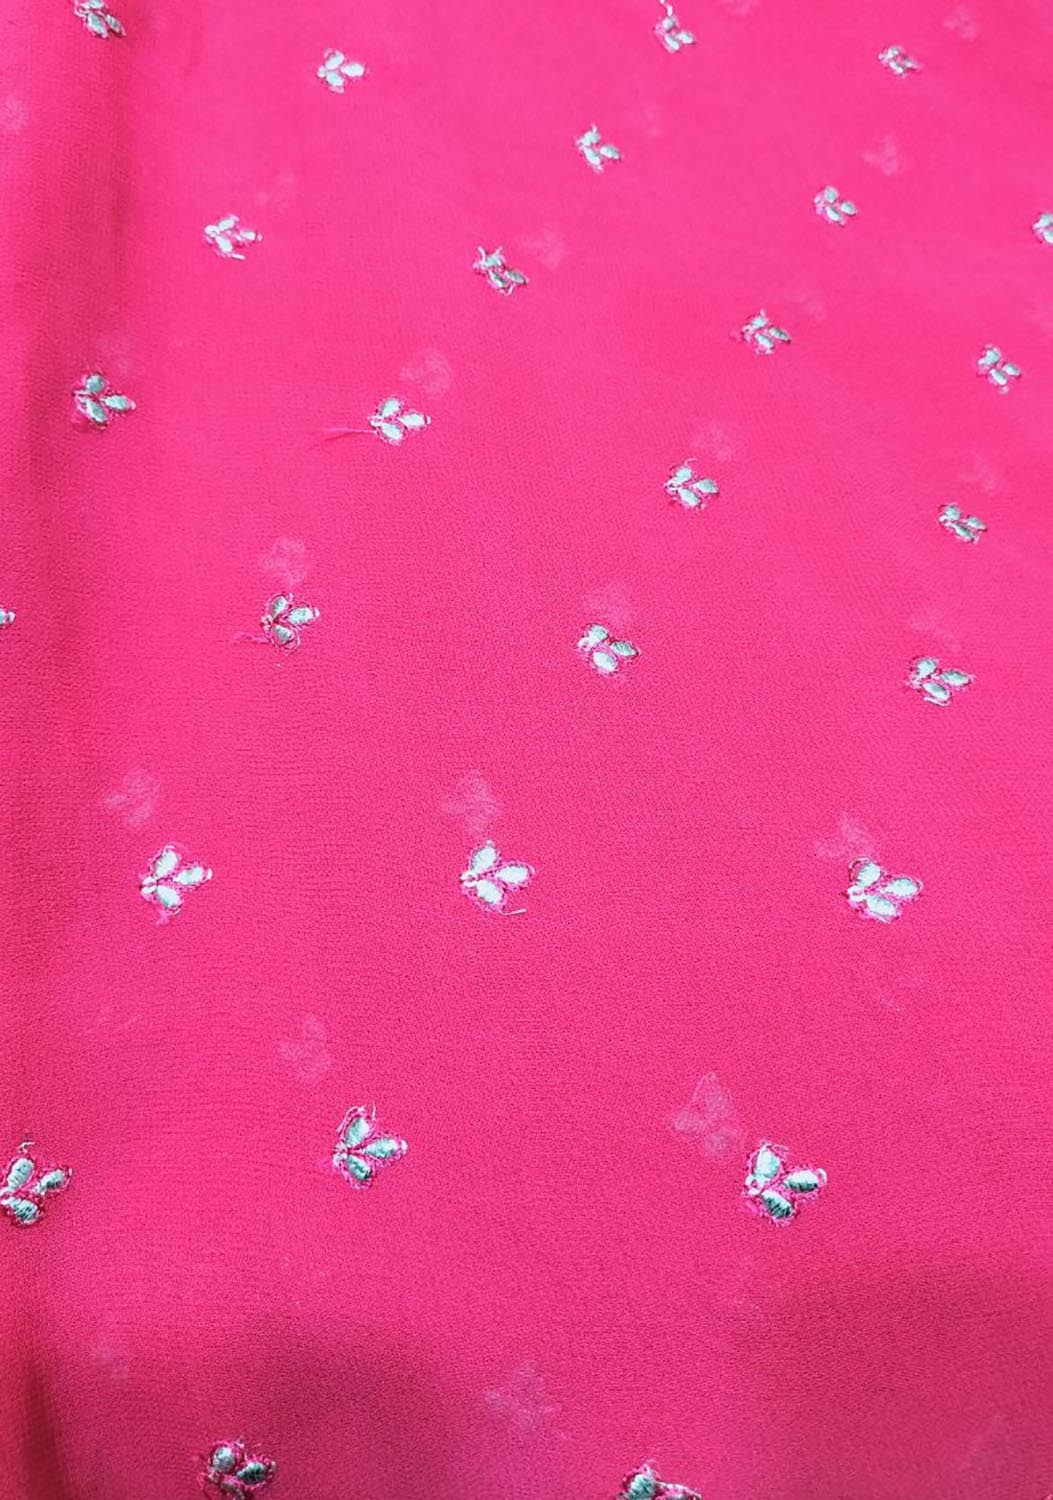 Stylish Pink Georgette Embroidered Fabric - 1 Mtr Length